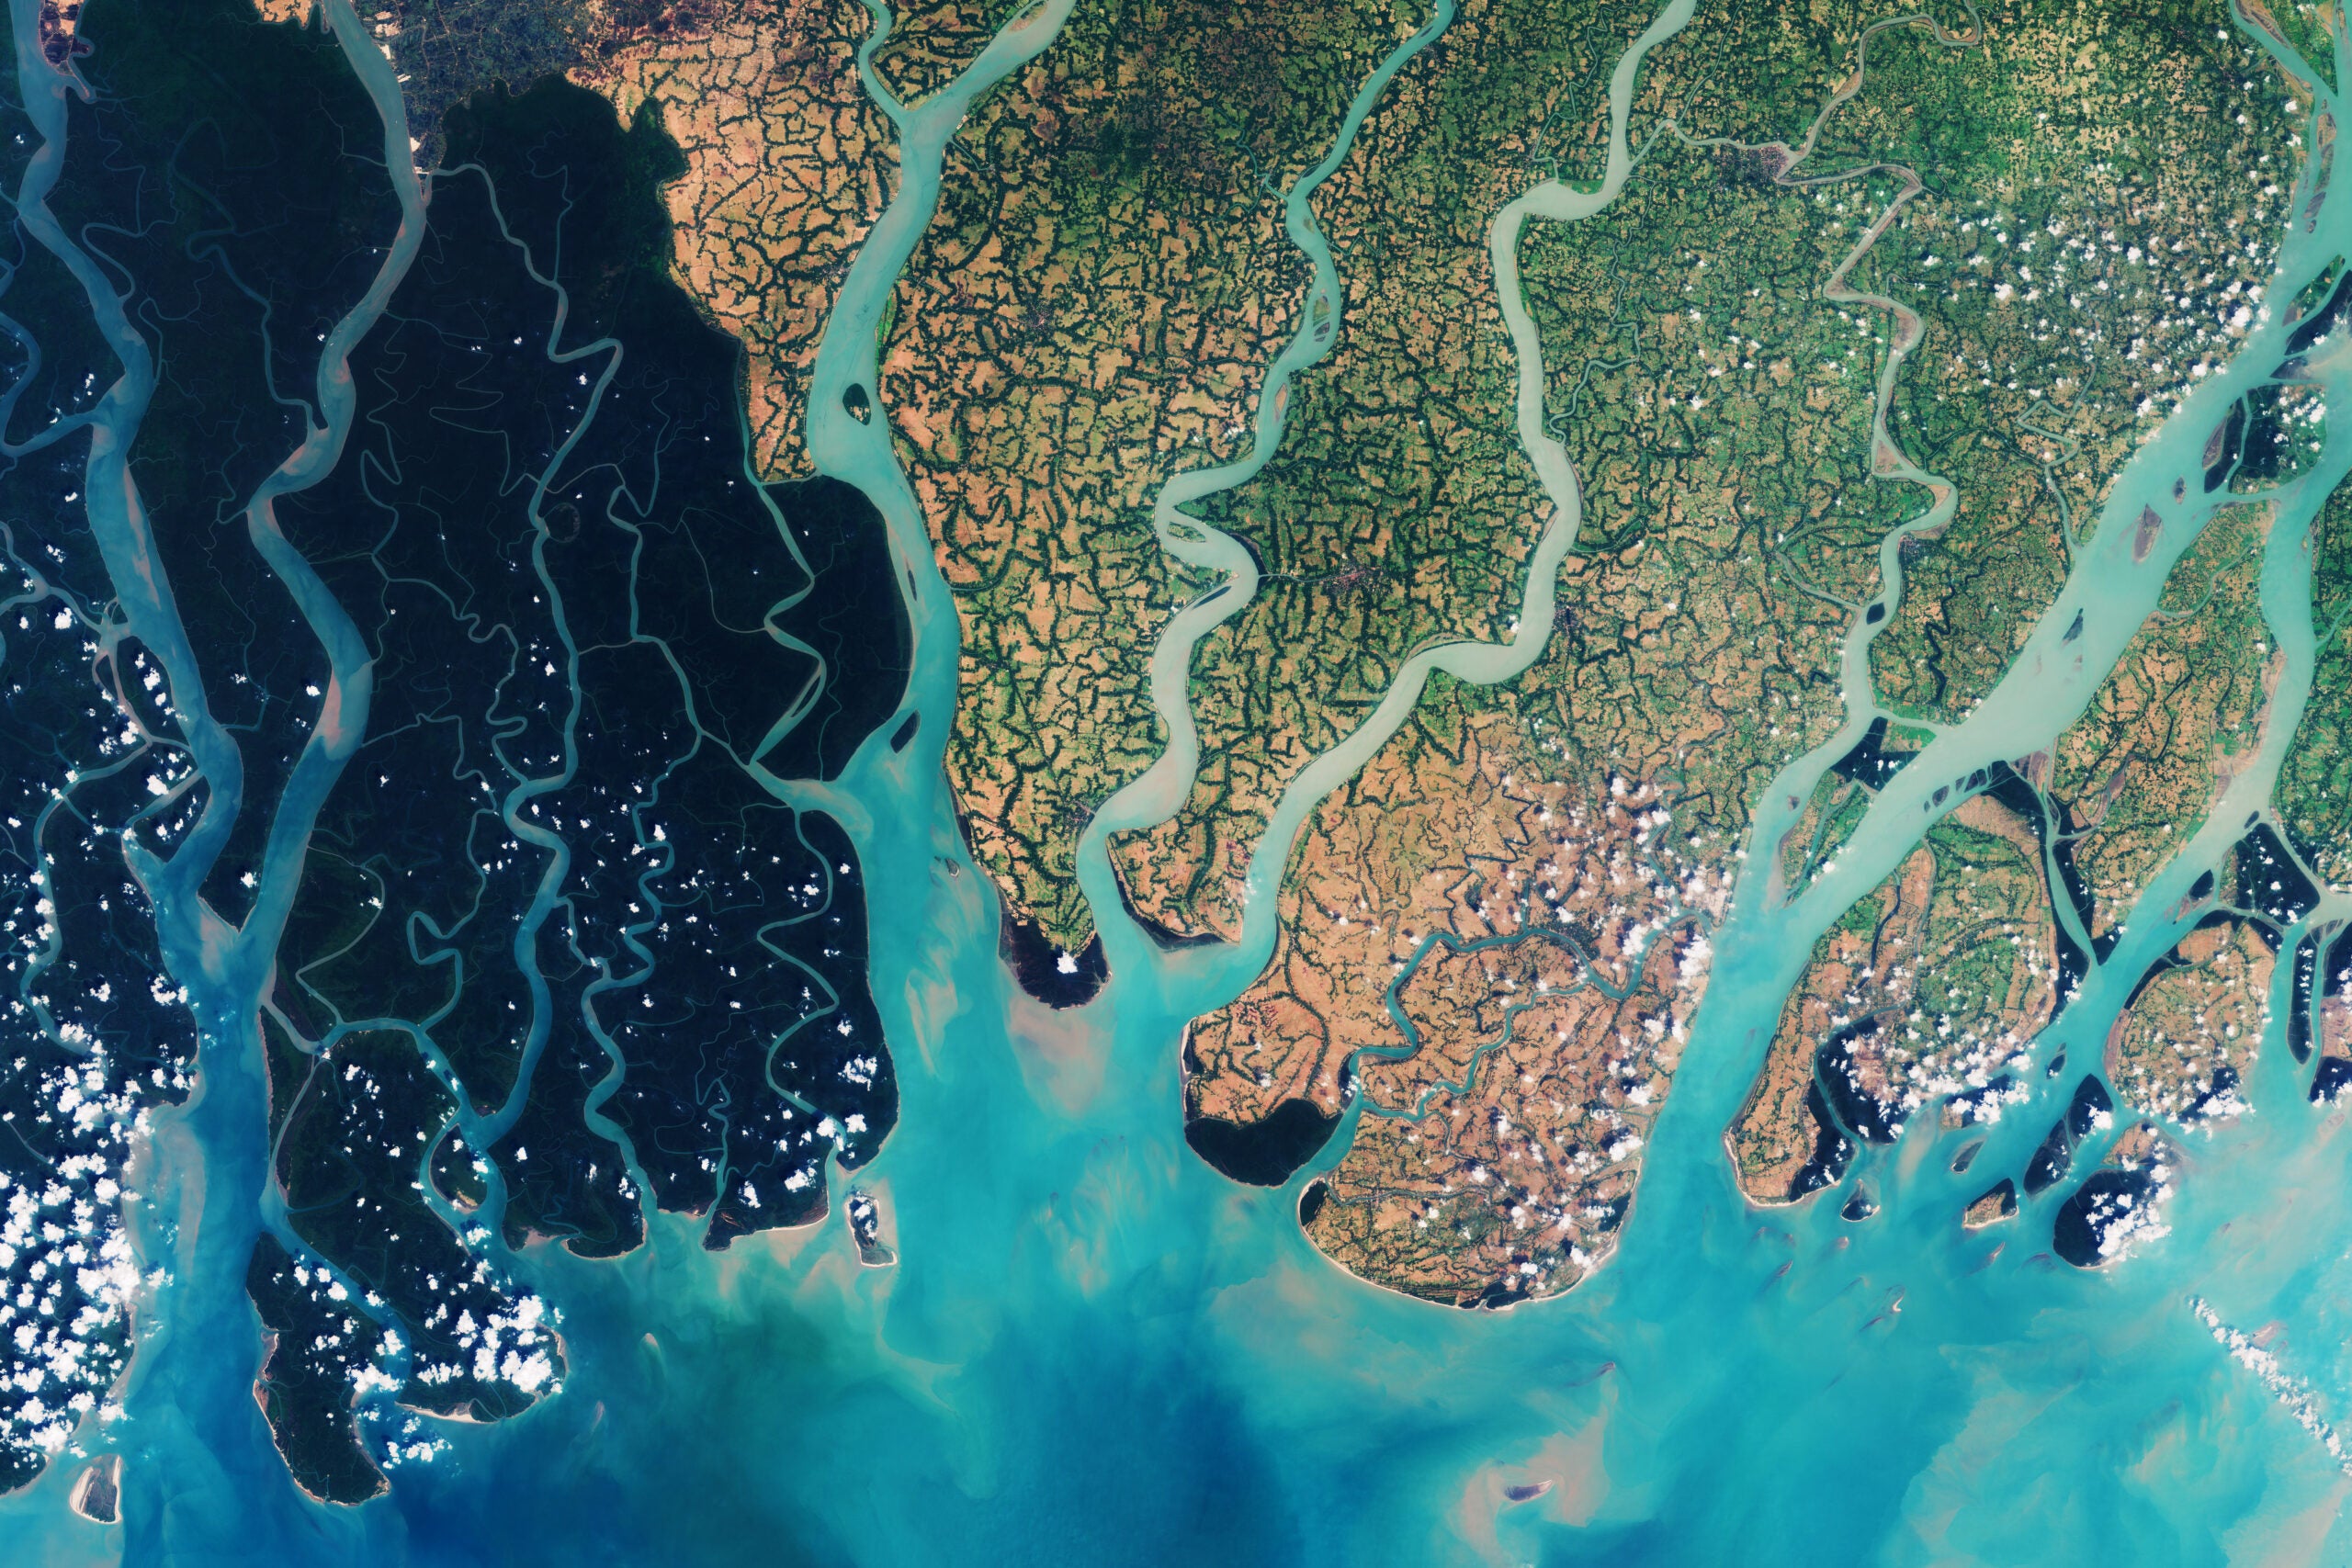 The Sundarbans mangrove forest as seen from outer space.
(ESA / lavizzara)